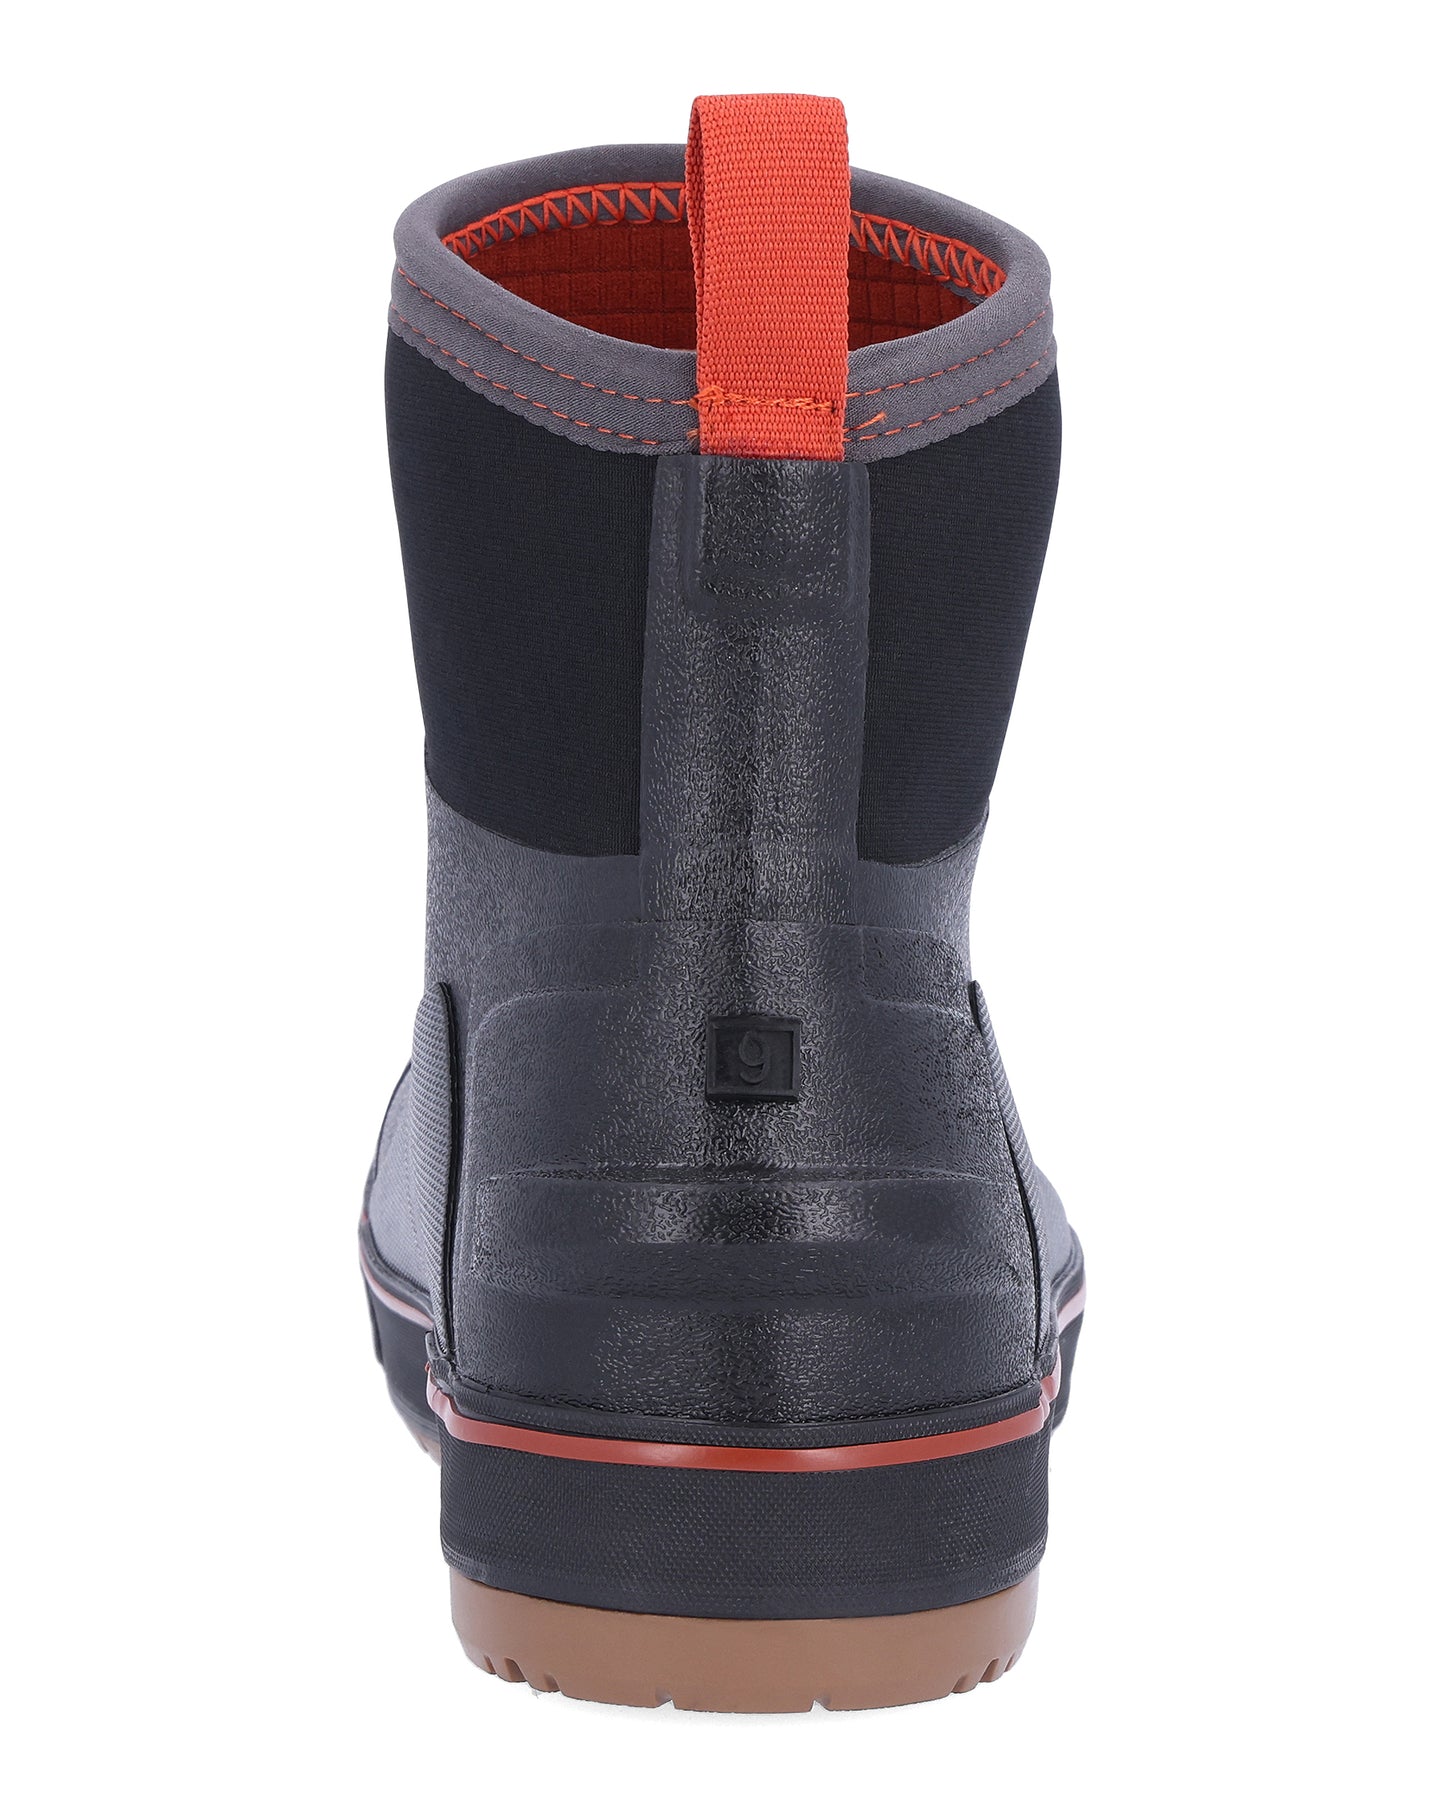    13939-001-simms-challenger-7inch-boot-tabletop